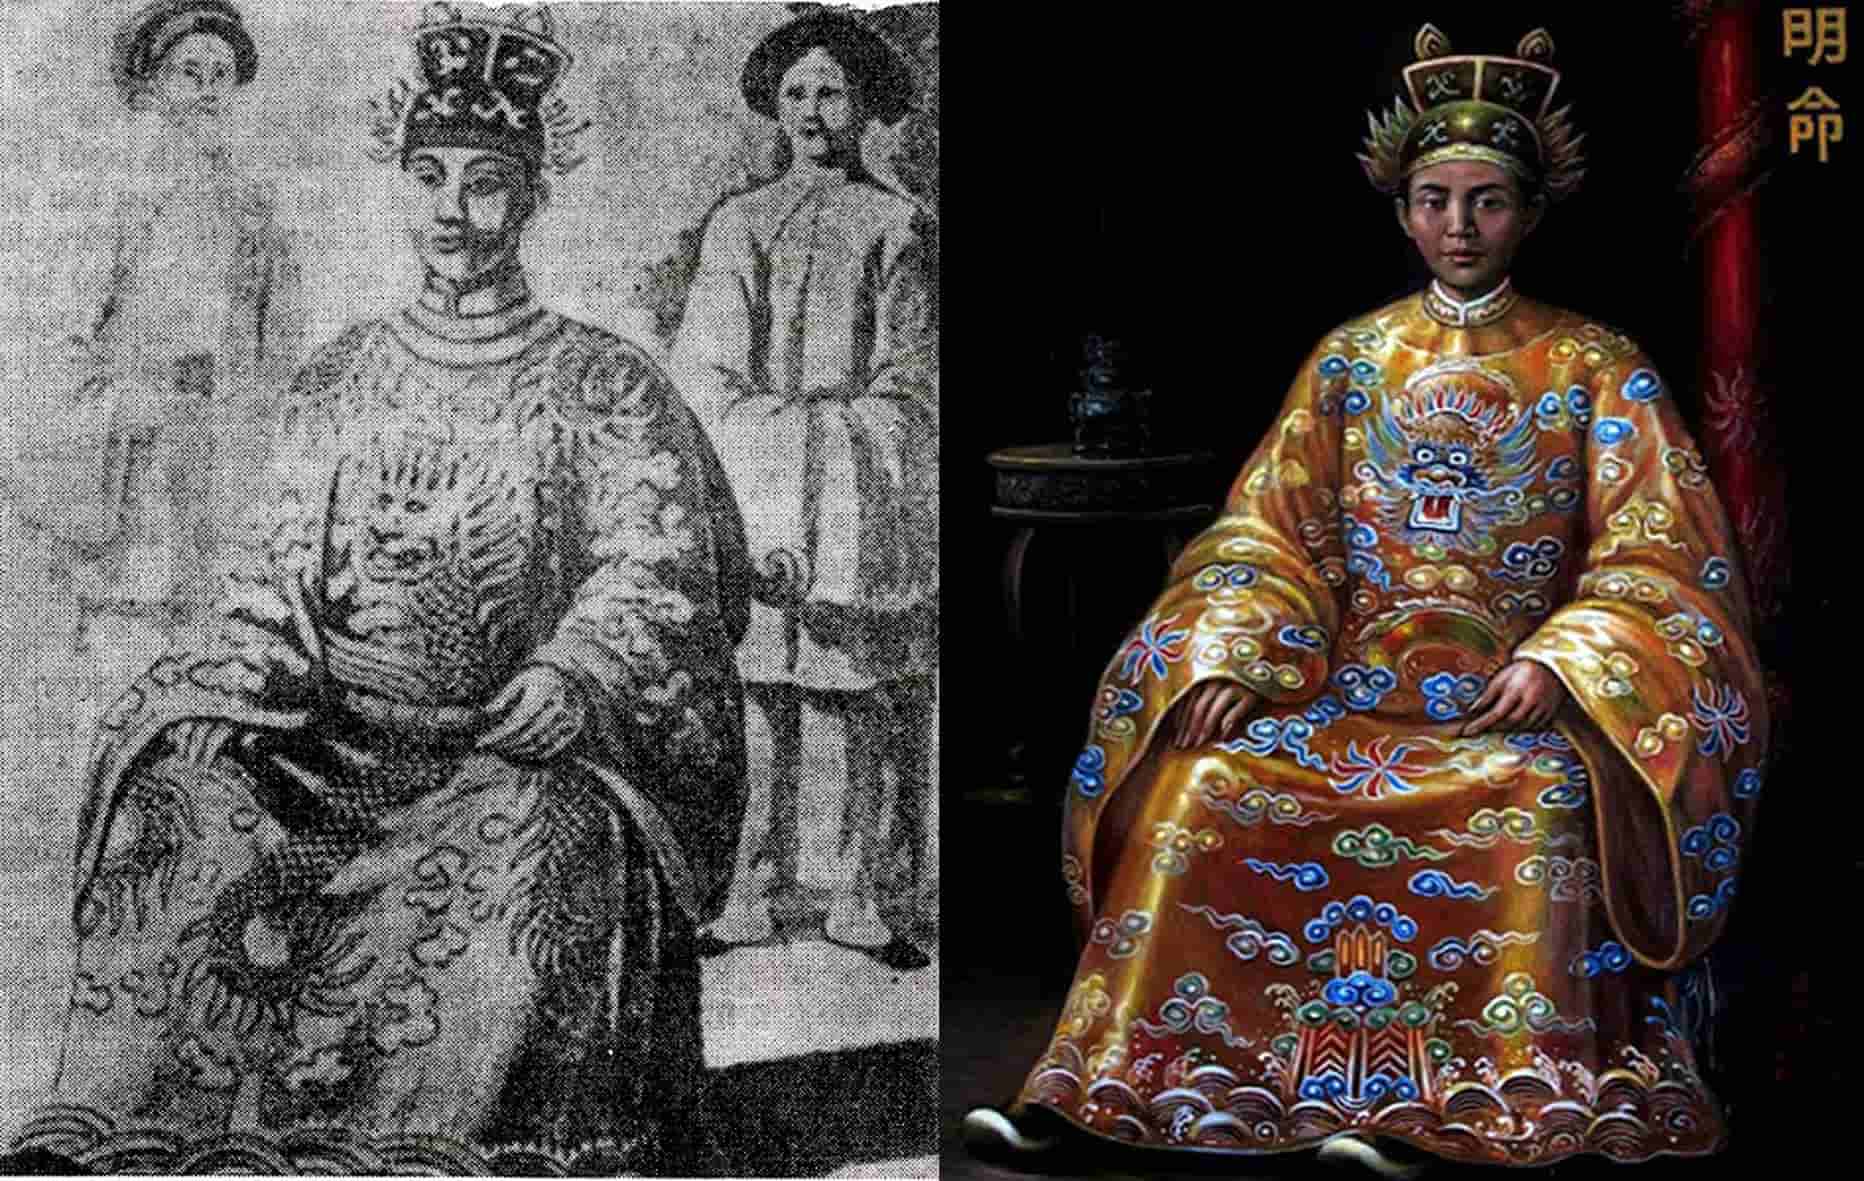 Minh Mang was a king who made significant contributions to the country during his reign